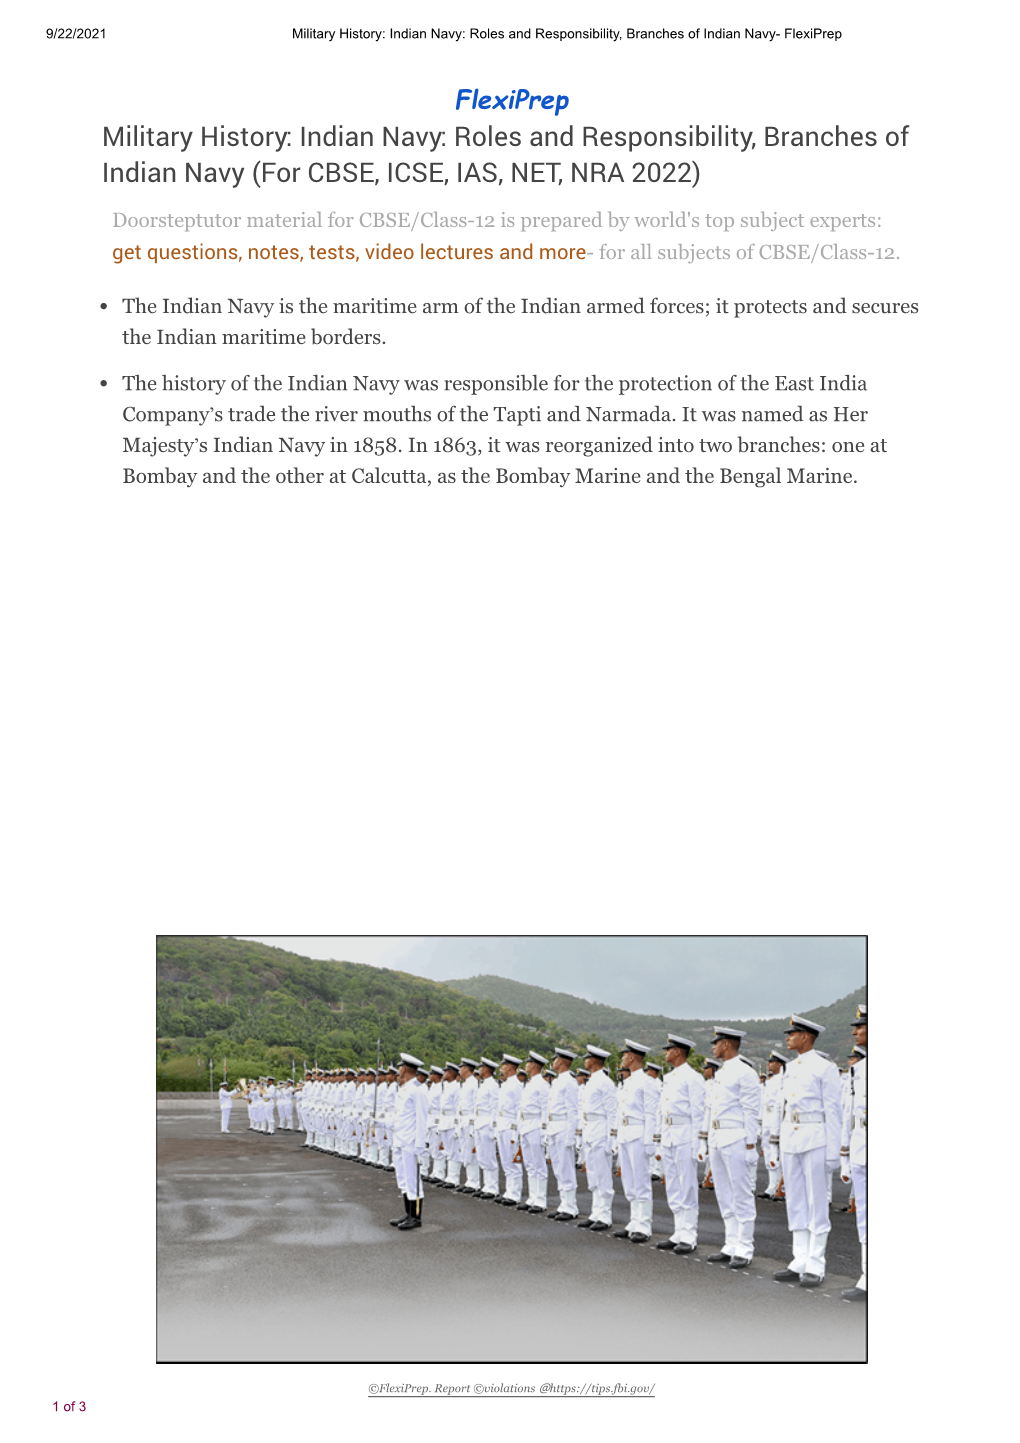 Indian Navy: Roles and Responsibility, Branches of Indian Navy- Flexiprep